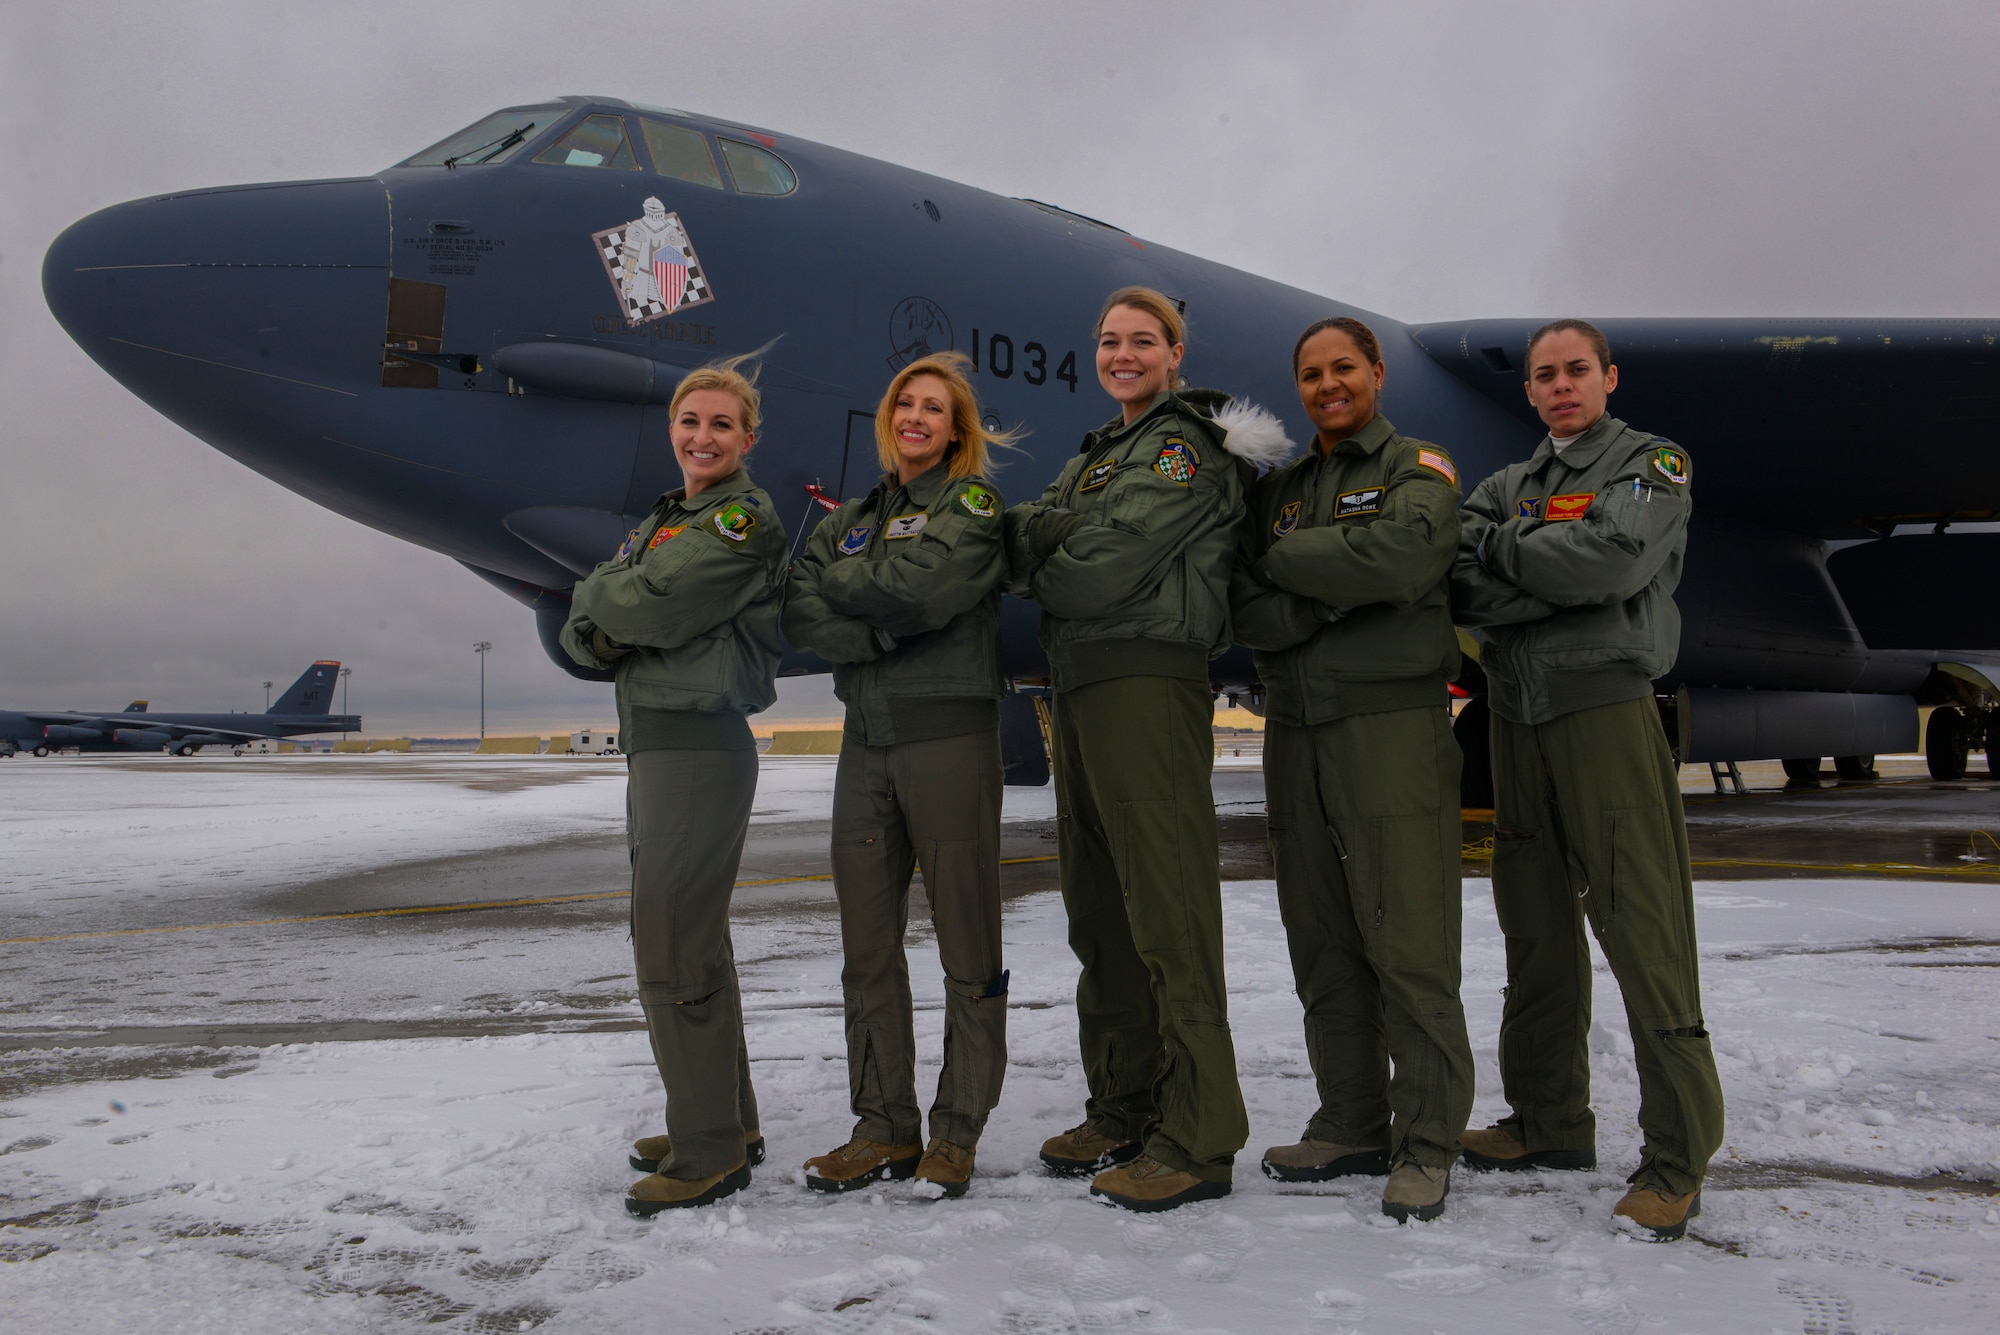 B-52 aircrew members pose for a photo in honor of Women's History month. Female missiliers and aircrew honored women before them by serving as an all-female crew on alert and in the B-52. (U.S. Air Force photo/Airman
1st Class Jessica Weissman)
